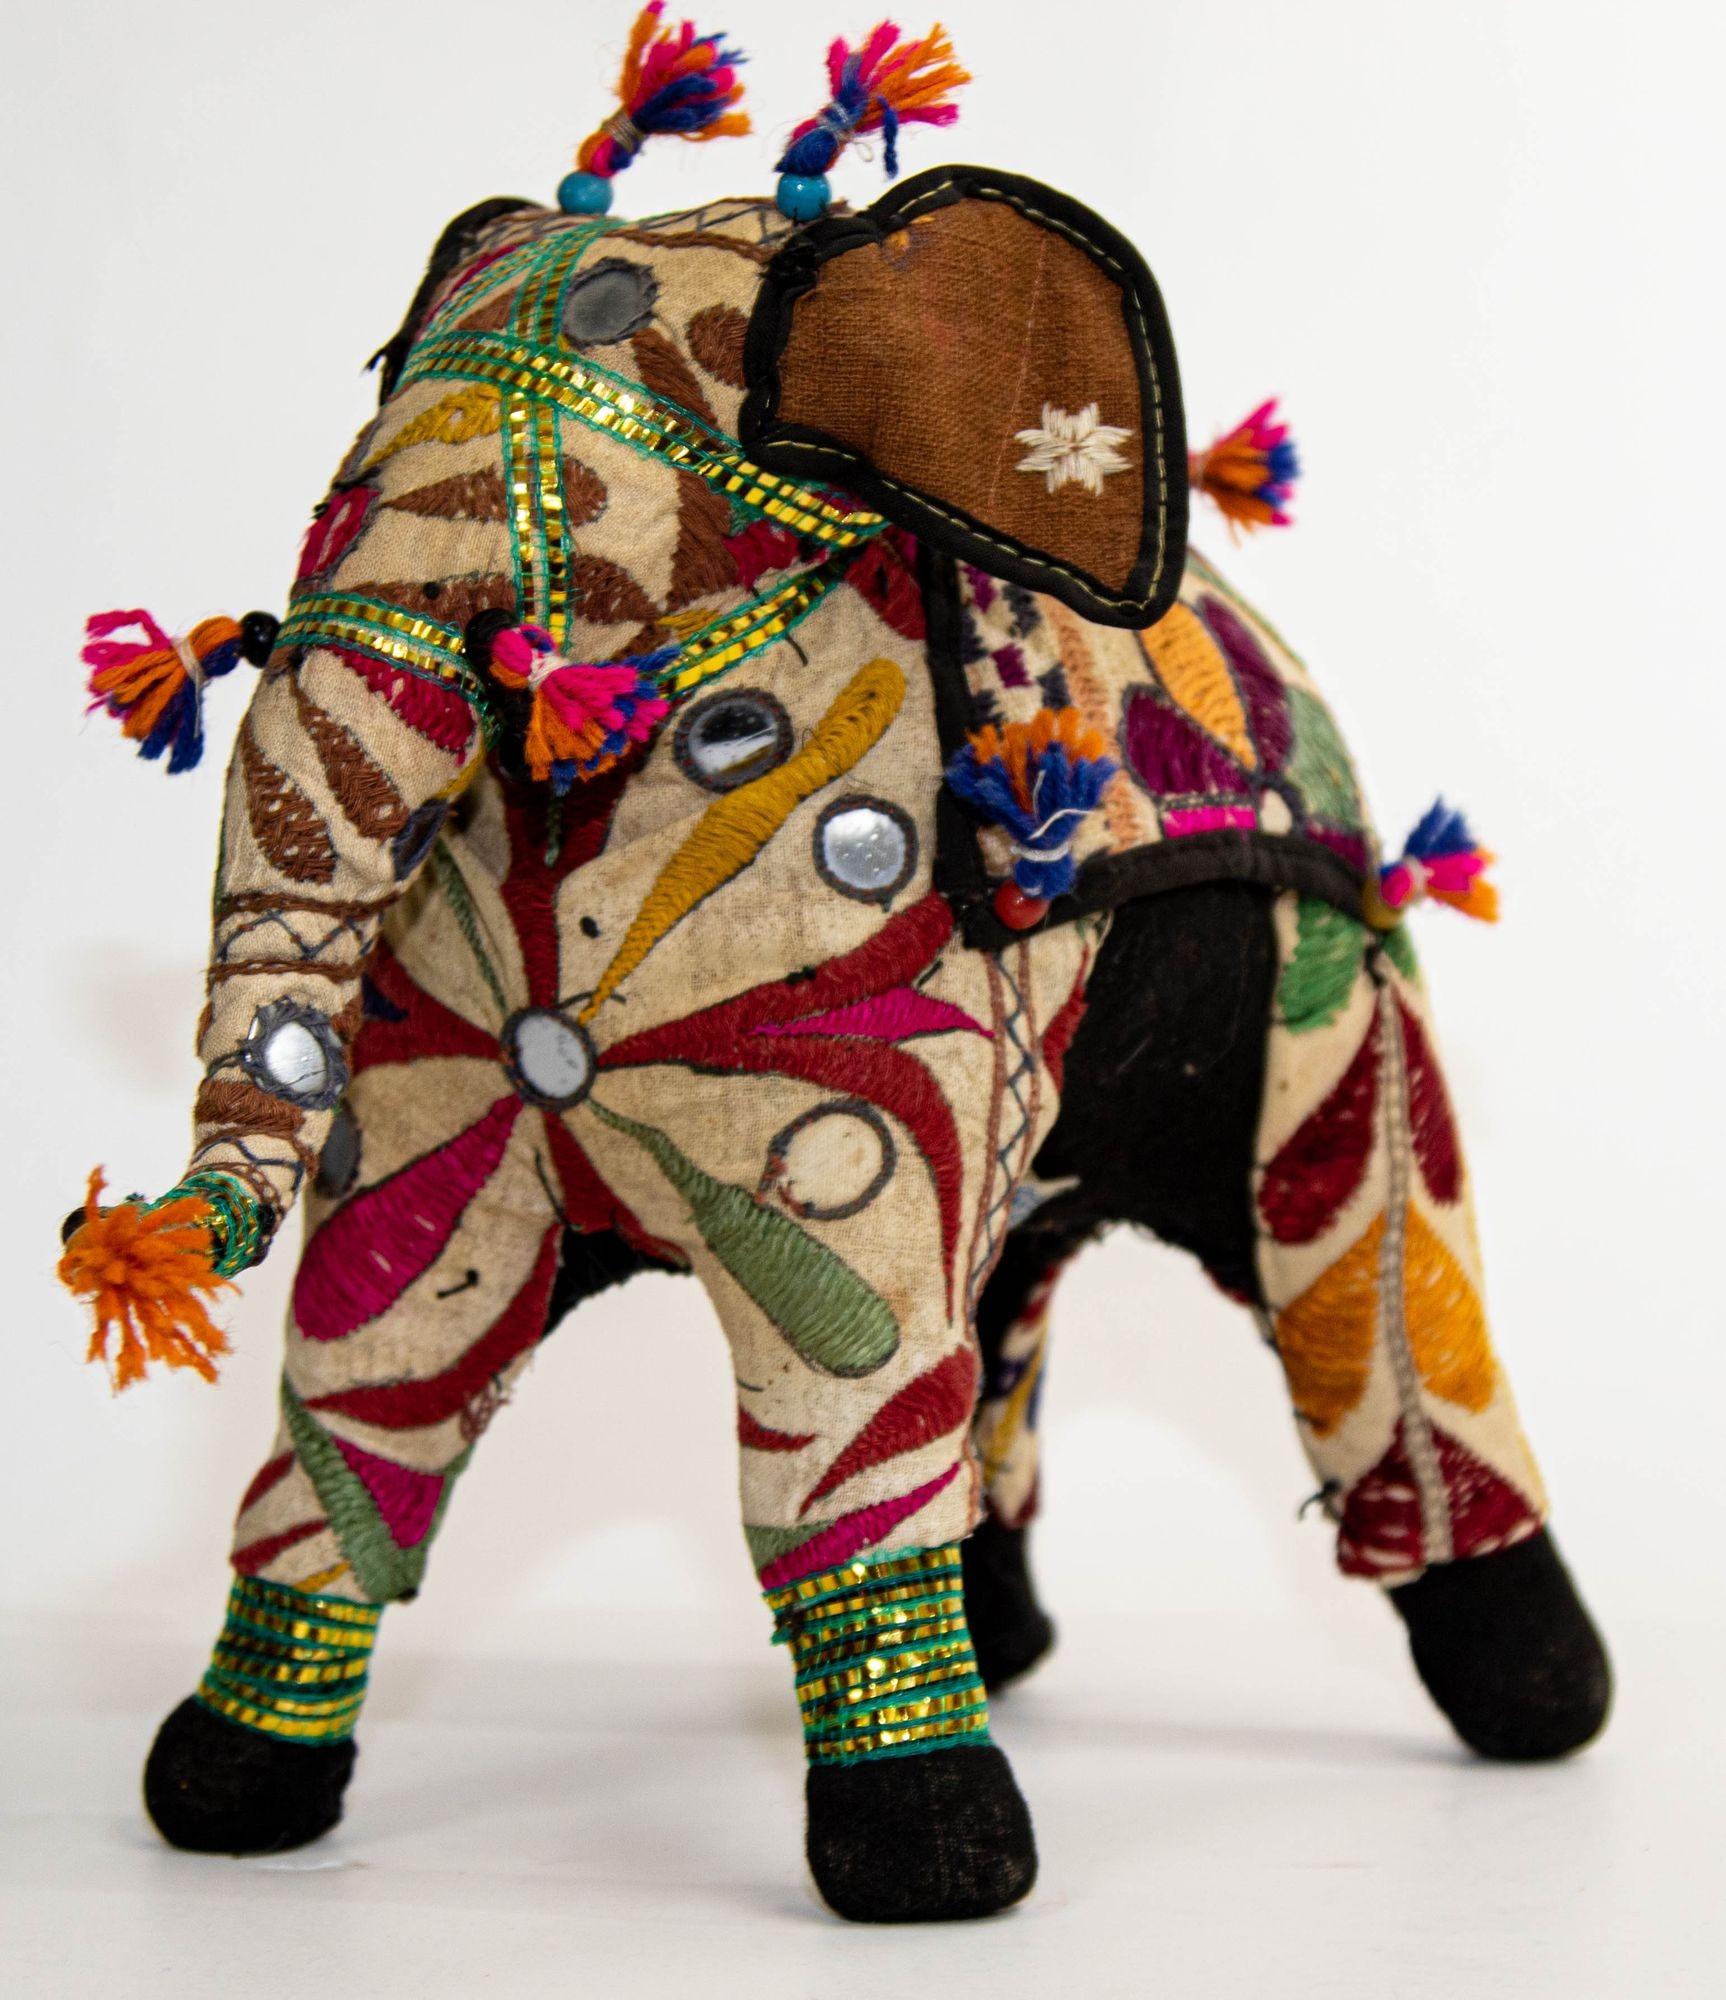 Vintage Raj Hand-Crafted Stuffed Cotton Embroidered Elephant, India, 1950 For Sale 8